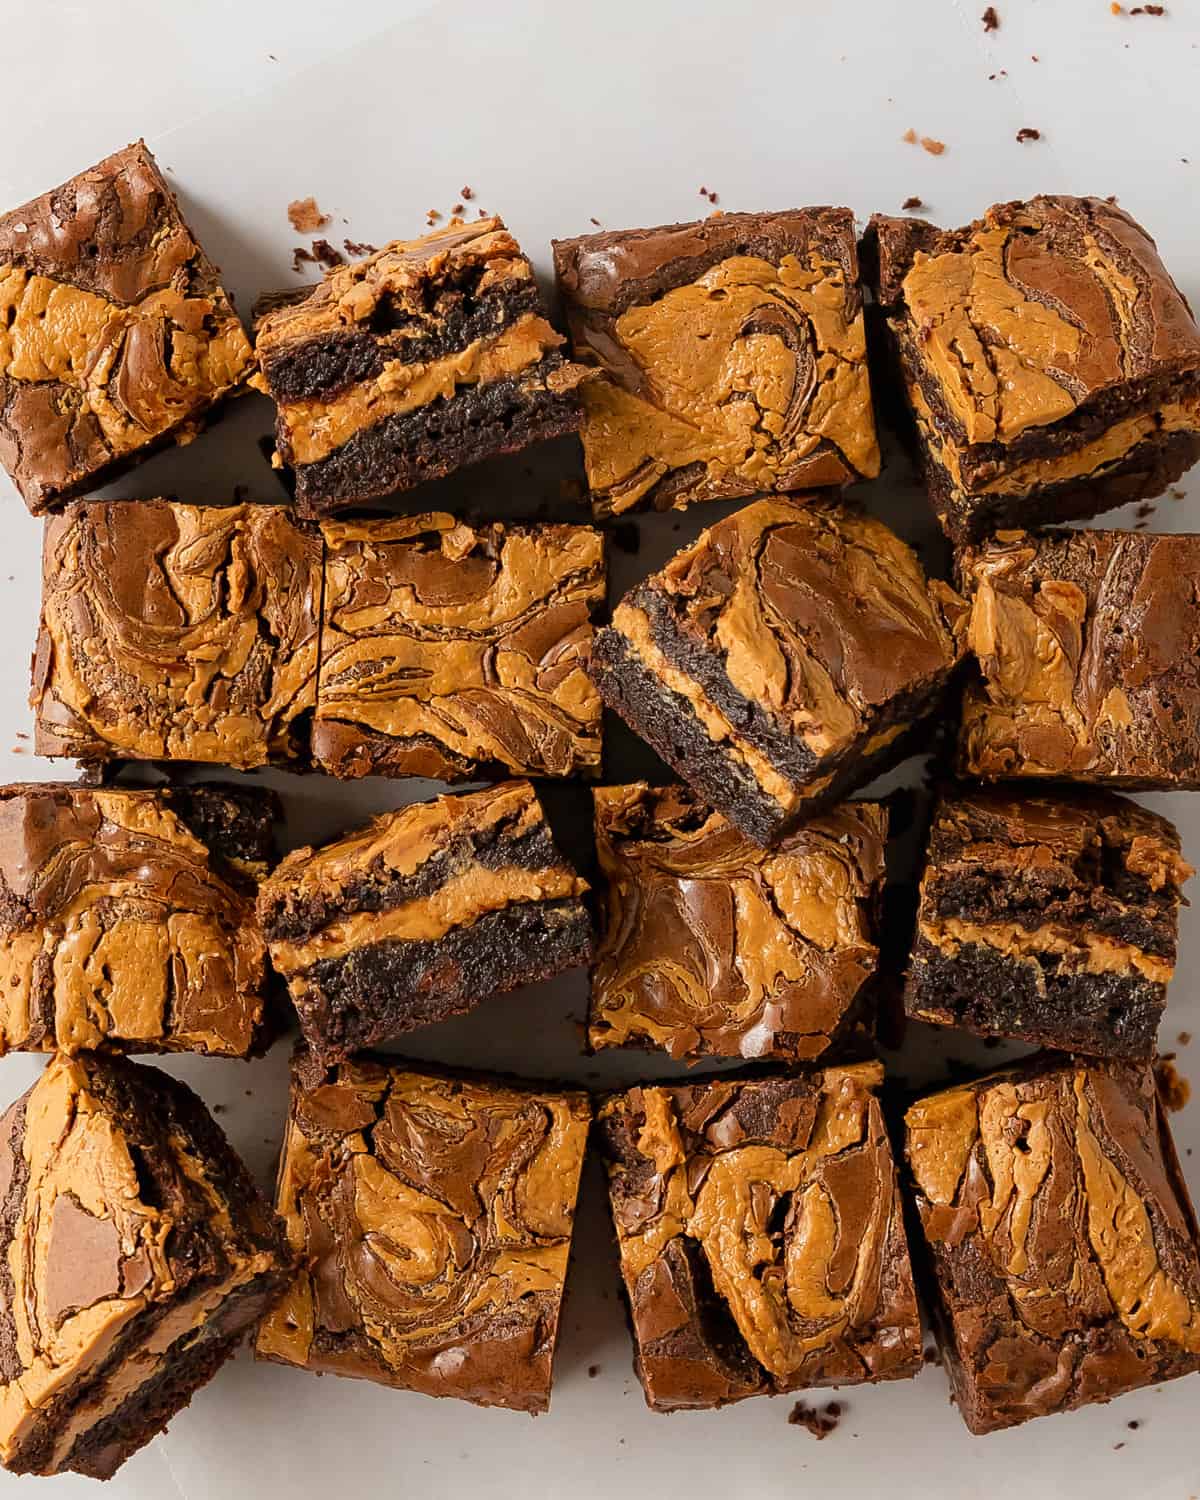 Peanut butter brownies are rich and fudgy brownies stuffed with a layer of creamy peanut butter filling. Top these easy and chewy stuffed brownies with swirls of peanut butter for even more decadent chocolate and peanut butter cup flavor. 